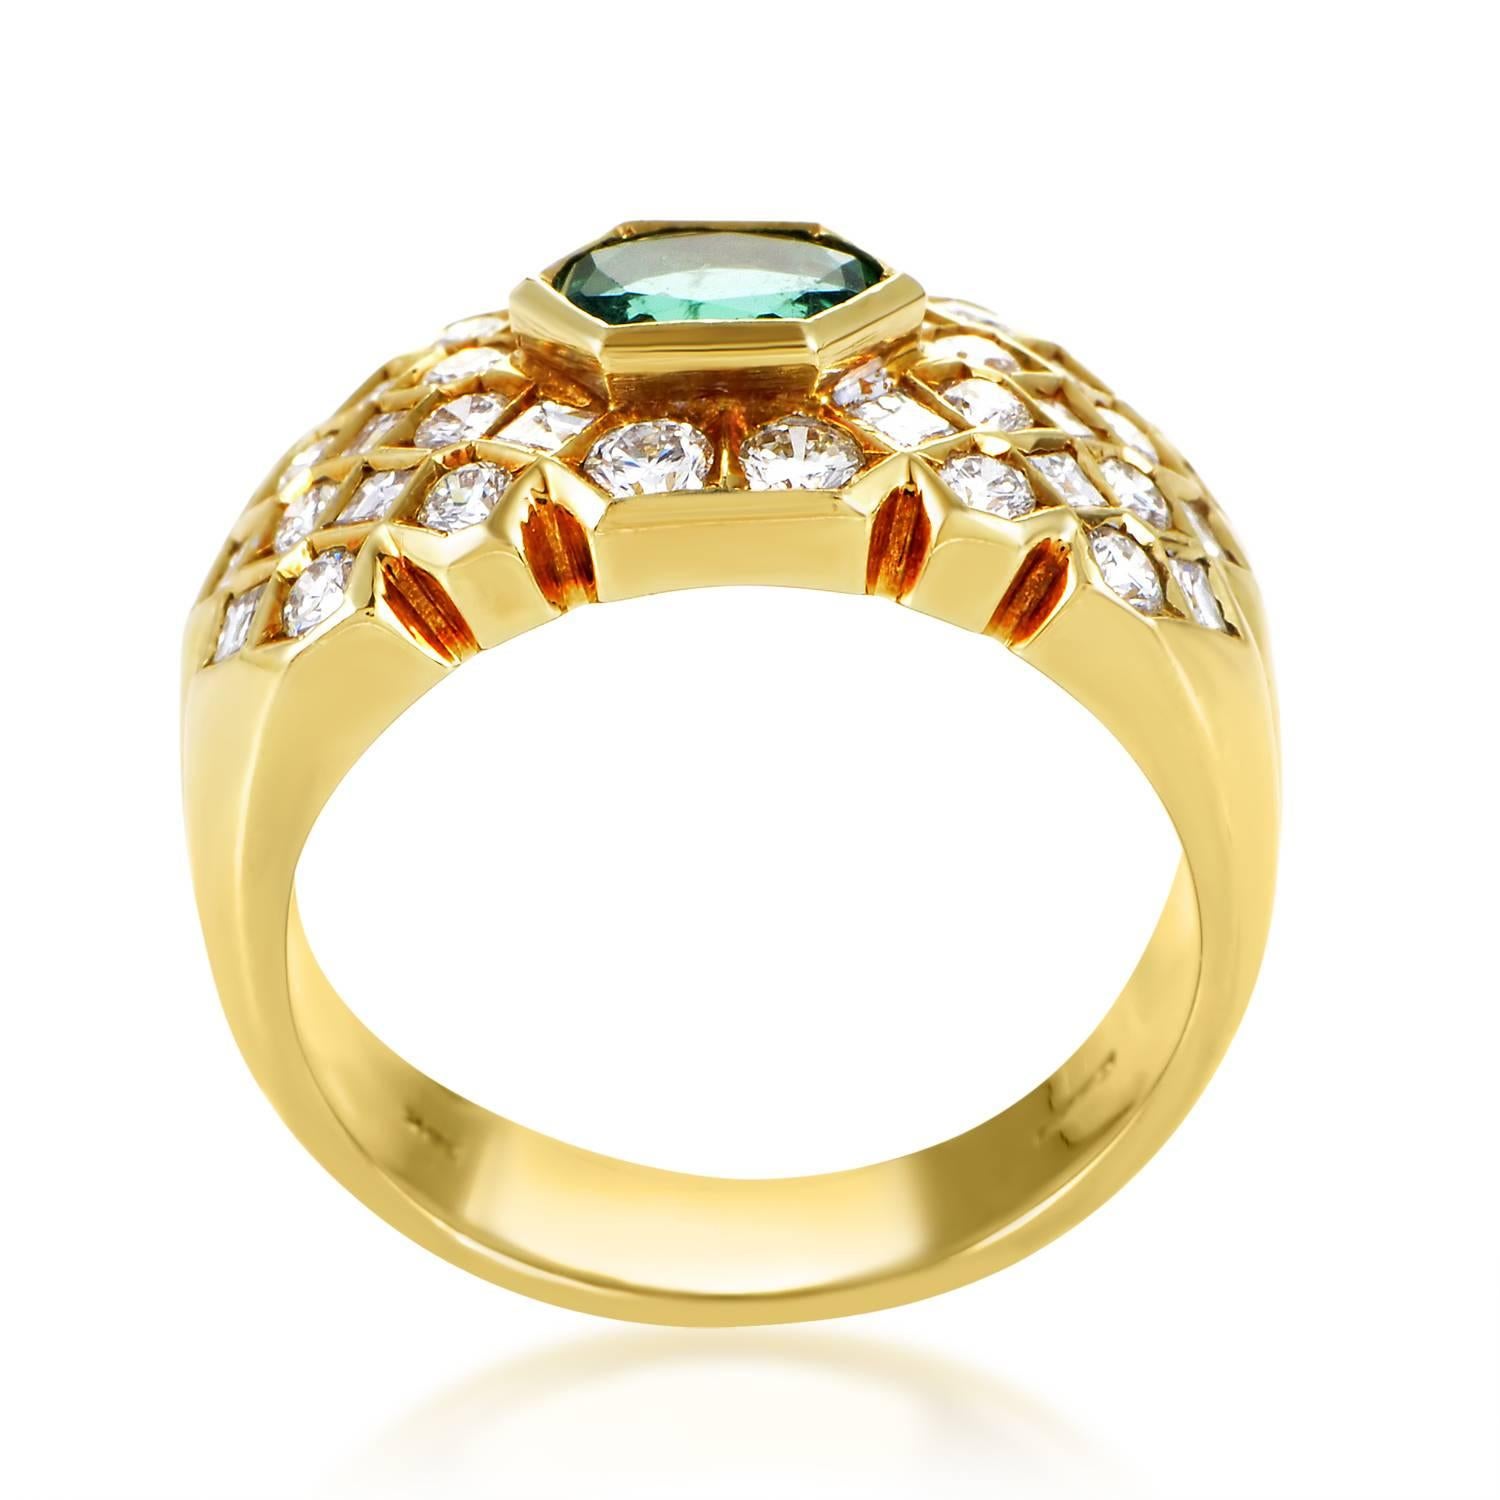 This lavish design from Fred of Paris is perfect for a lady who loves elegance. The ring is made of 18K yellow gold, and is set with 1.30ct of sparkling white diamonds. Lastly, the ring's main attraction is a 1ct emerald main stone.
Ring Size: 5.5